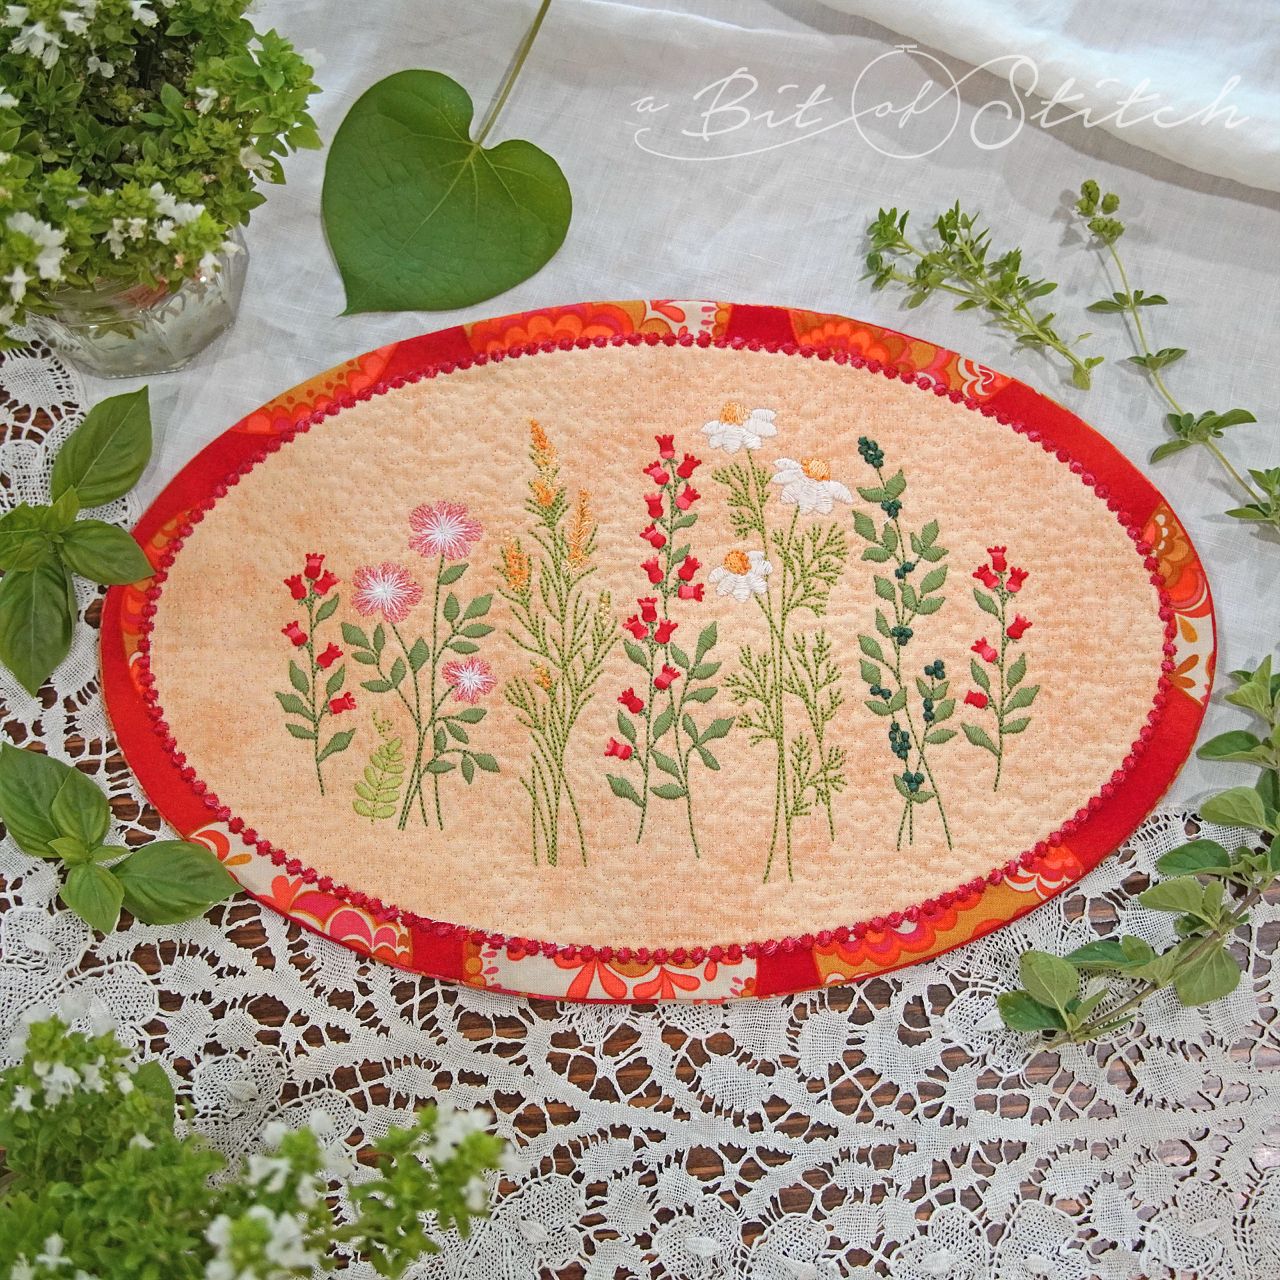 Meadow Flowers wildflower floral machine embroidery designs by A Bit of Stitch on oval shaped made-in-the-hoop doily table topper